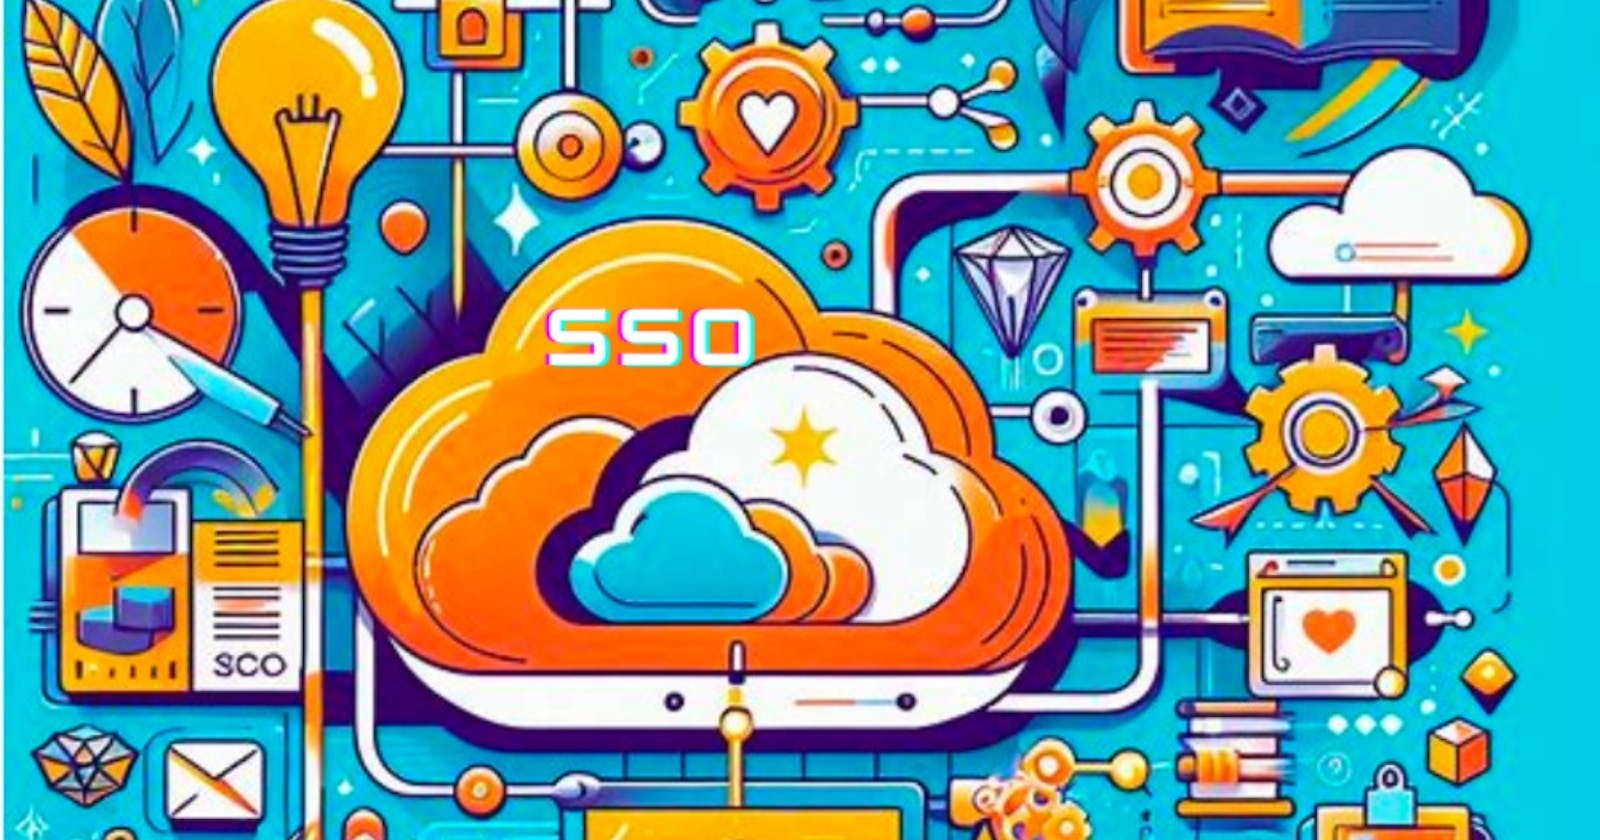 Streamlining AWS SSO in Complex Multi-Account Environments